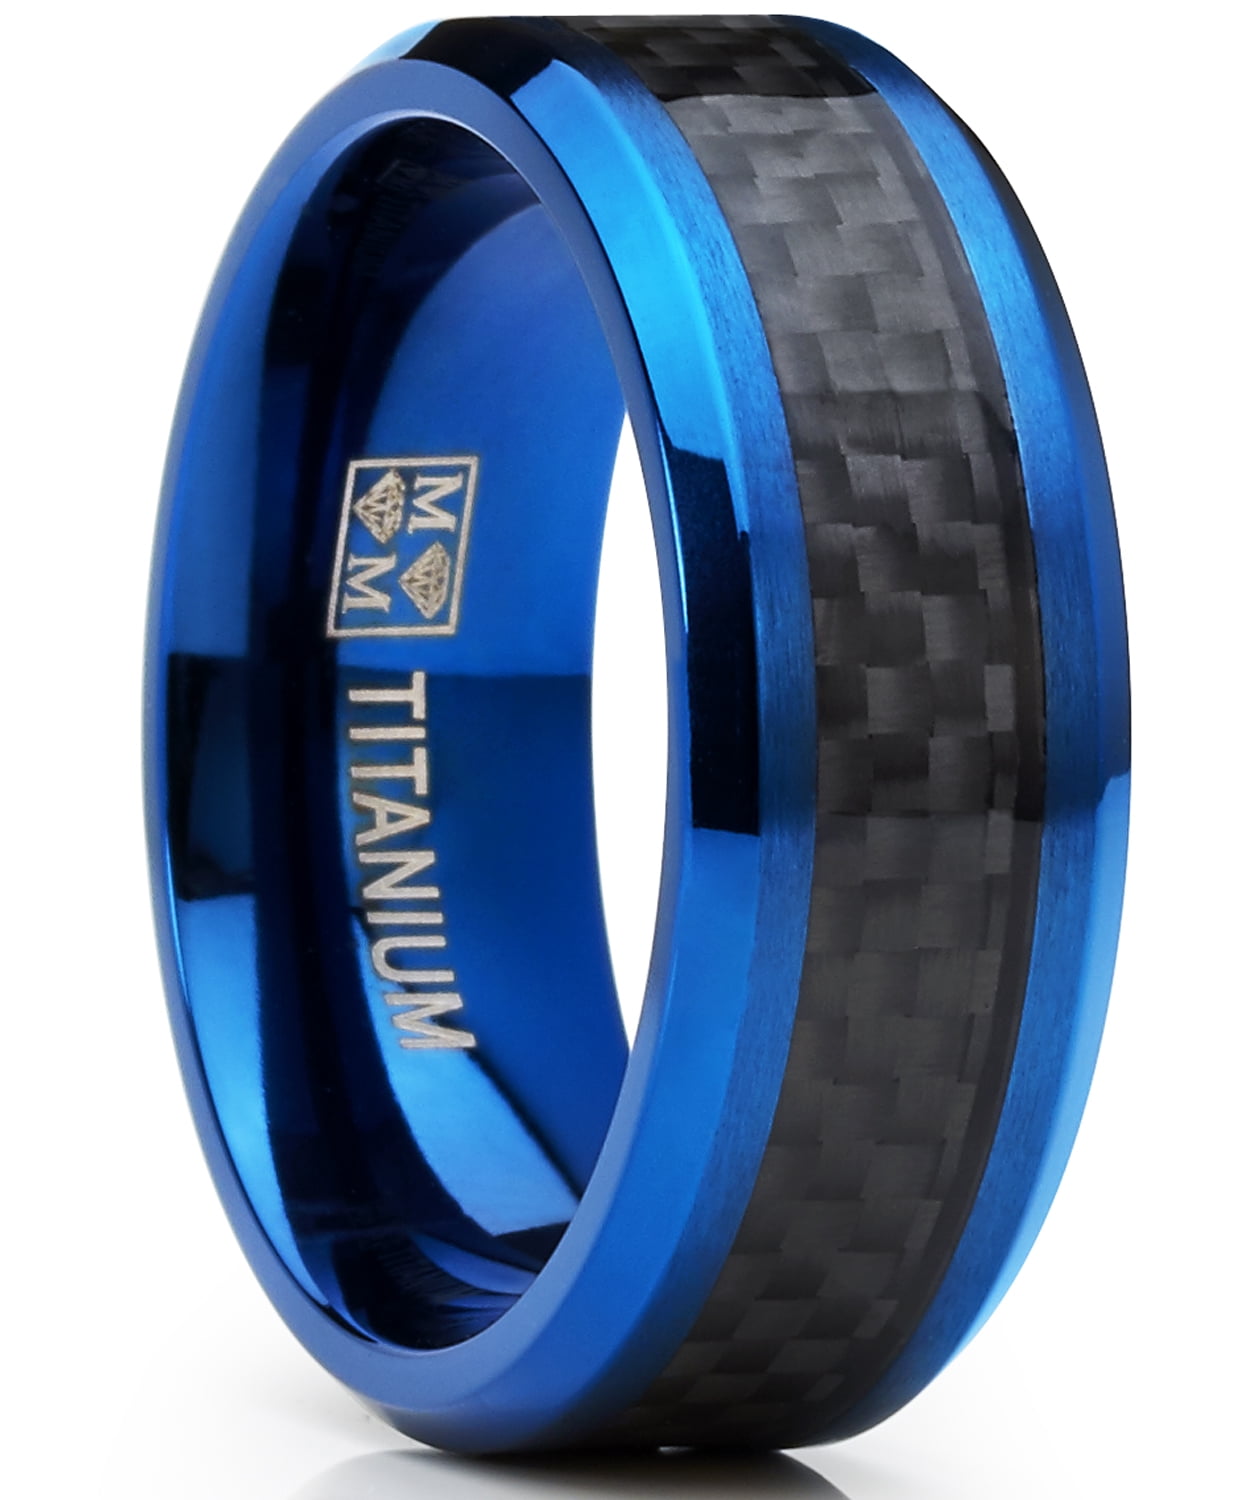 Men's Titanium Wedding Band, Engagement Ring, Blue Ion Plating and ...